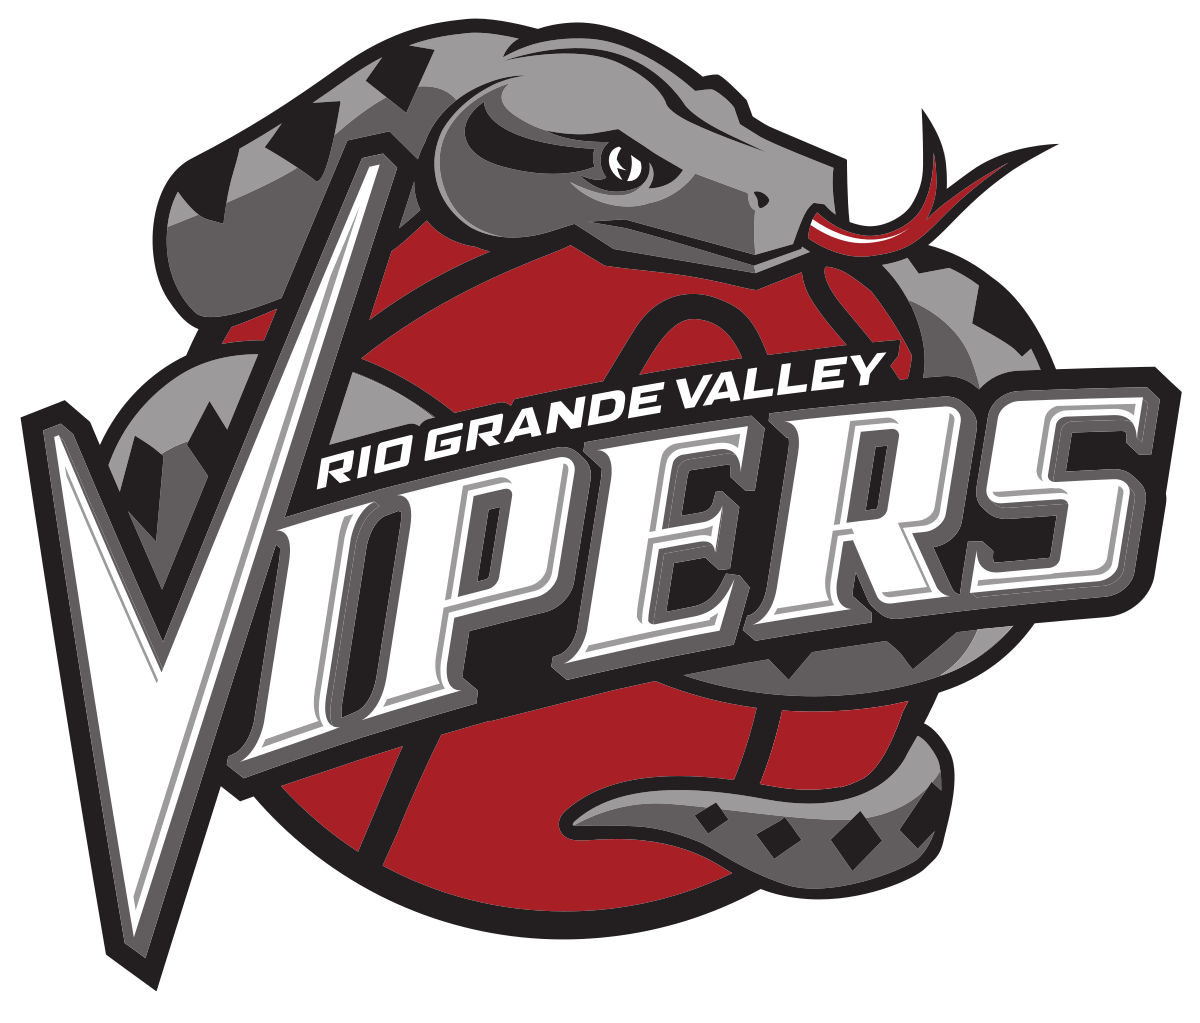 Pittsburgh Vipers Logo - Rio Grande Valley Vipers